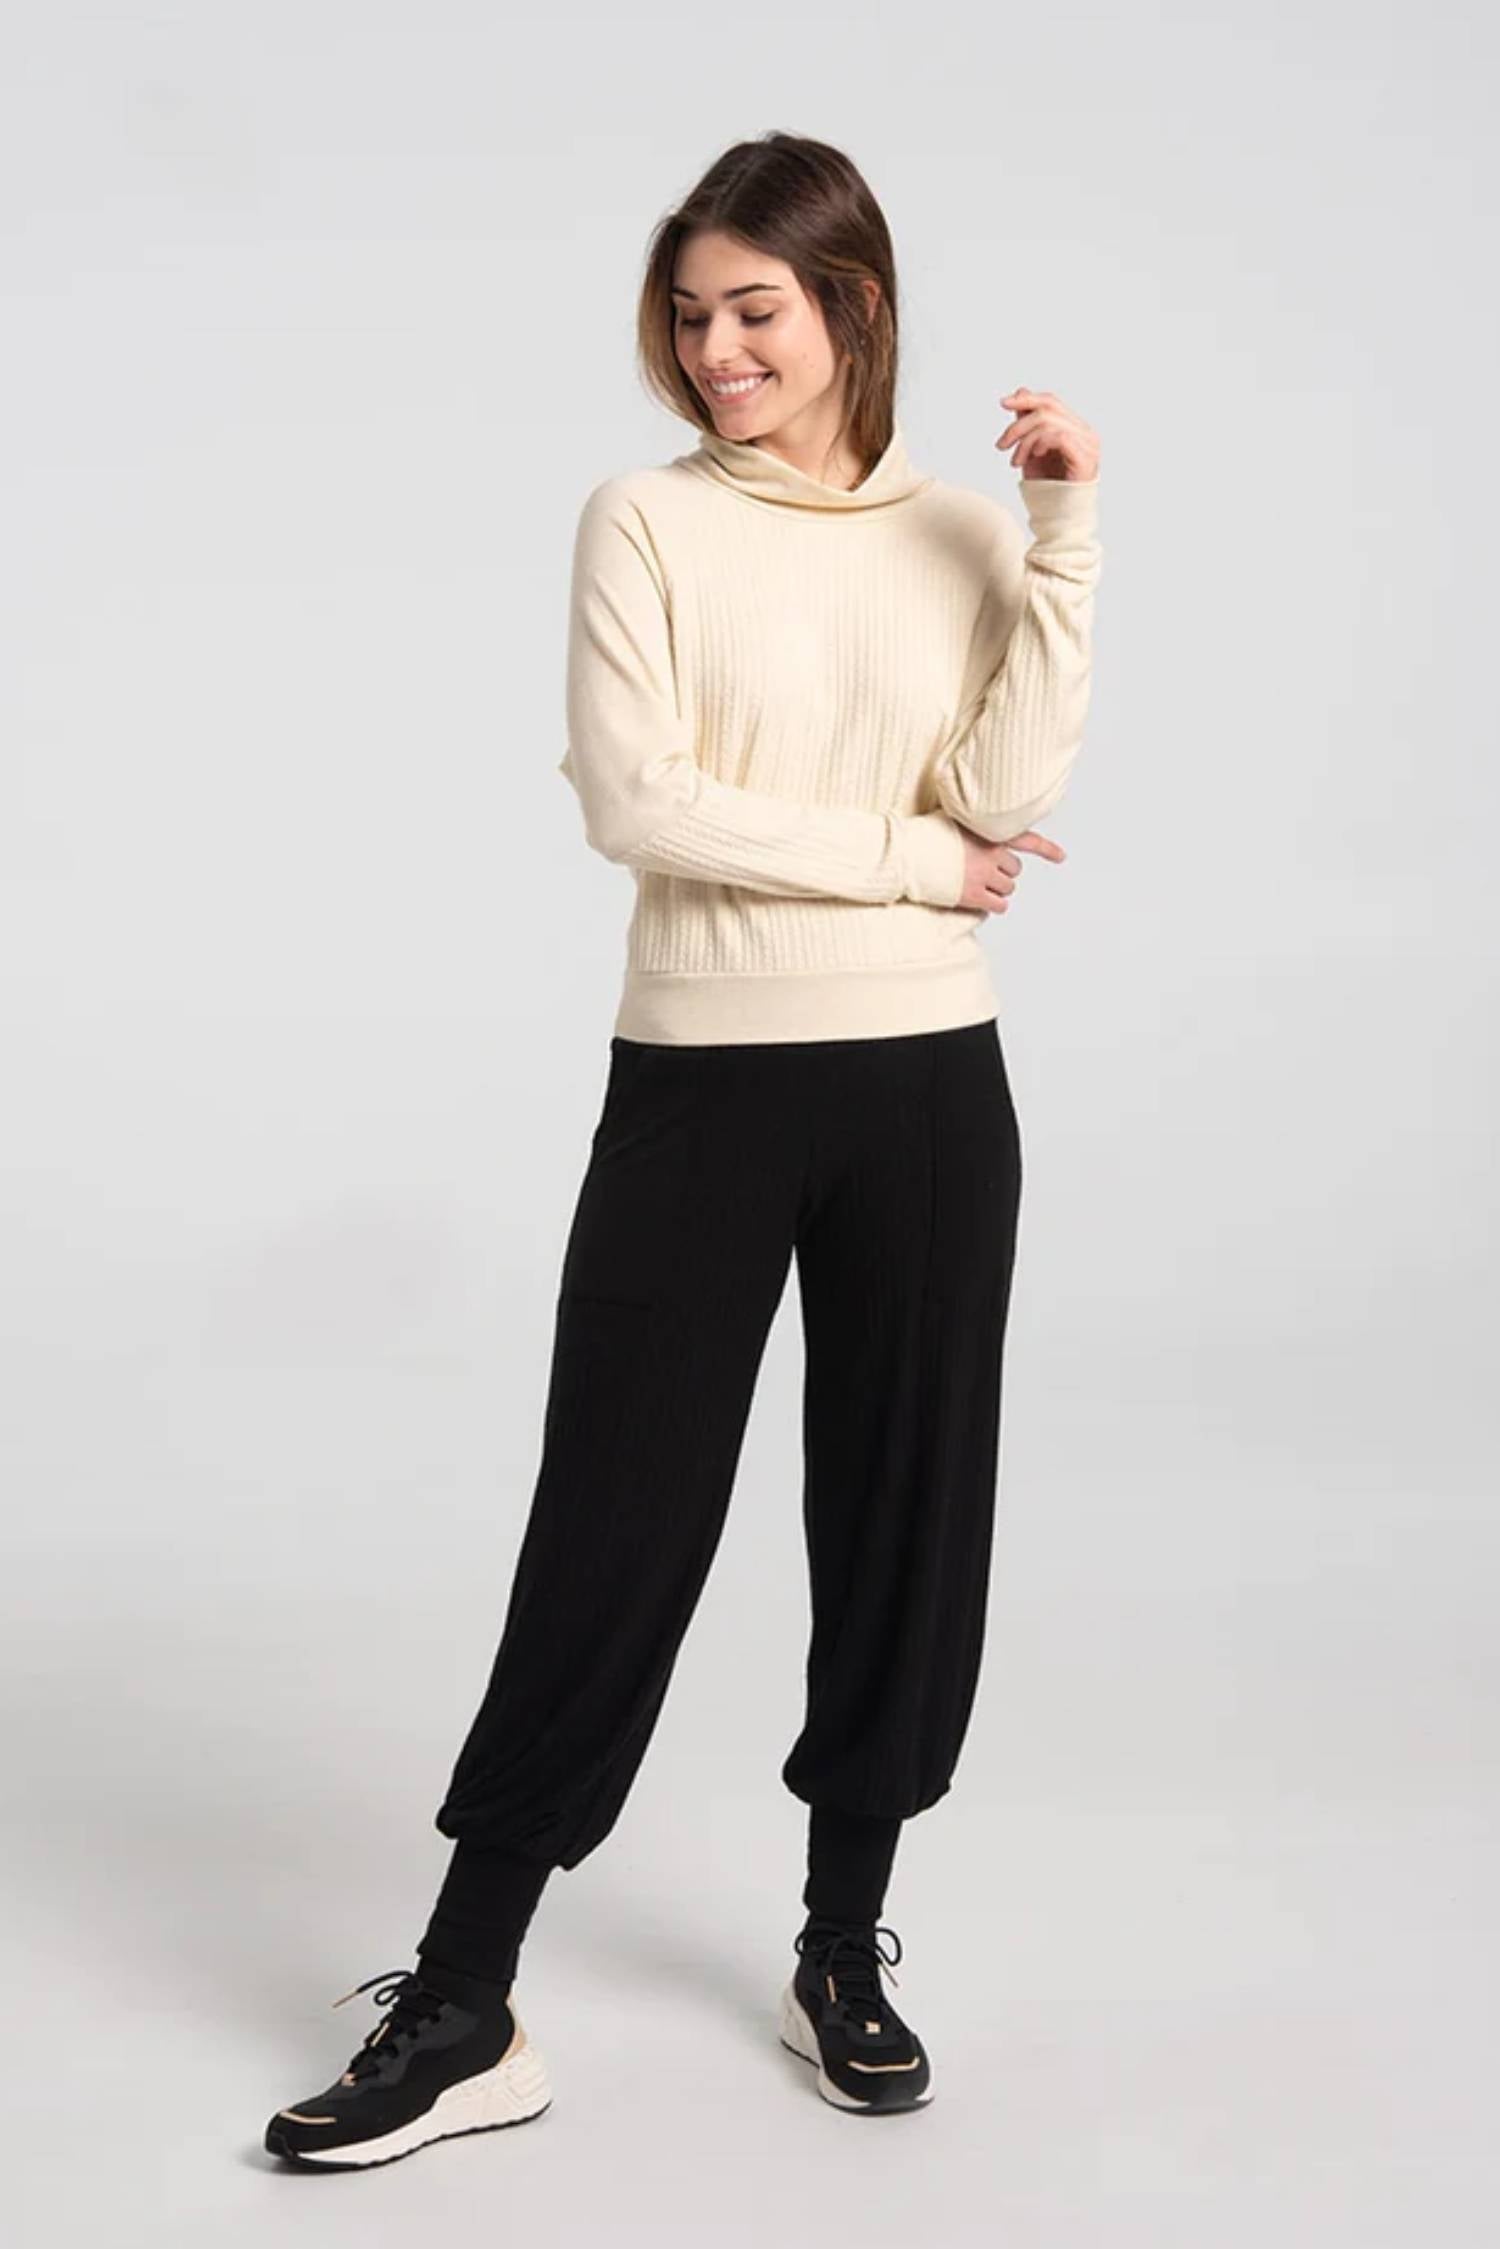 Seth Sweater by Kollontai, Cream, cowl neck, raglan sleeves, fine cable knit on lower sleeves and front, hip length, sizes XS to XXL, made in Montreal